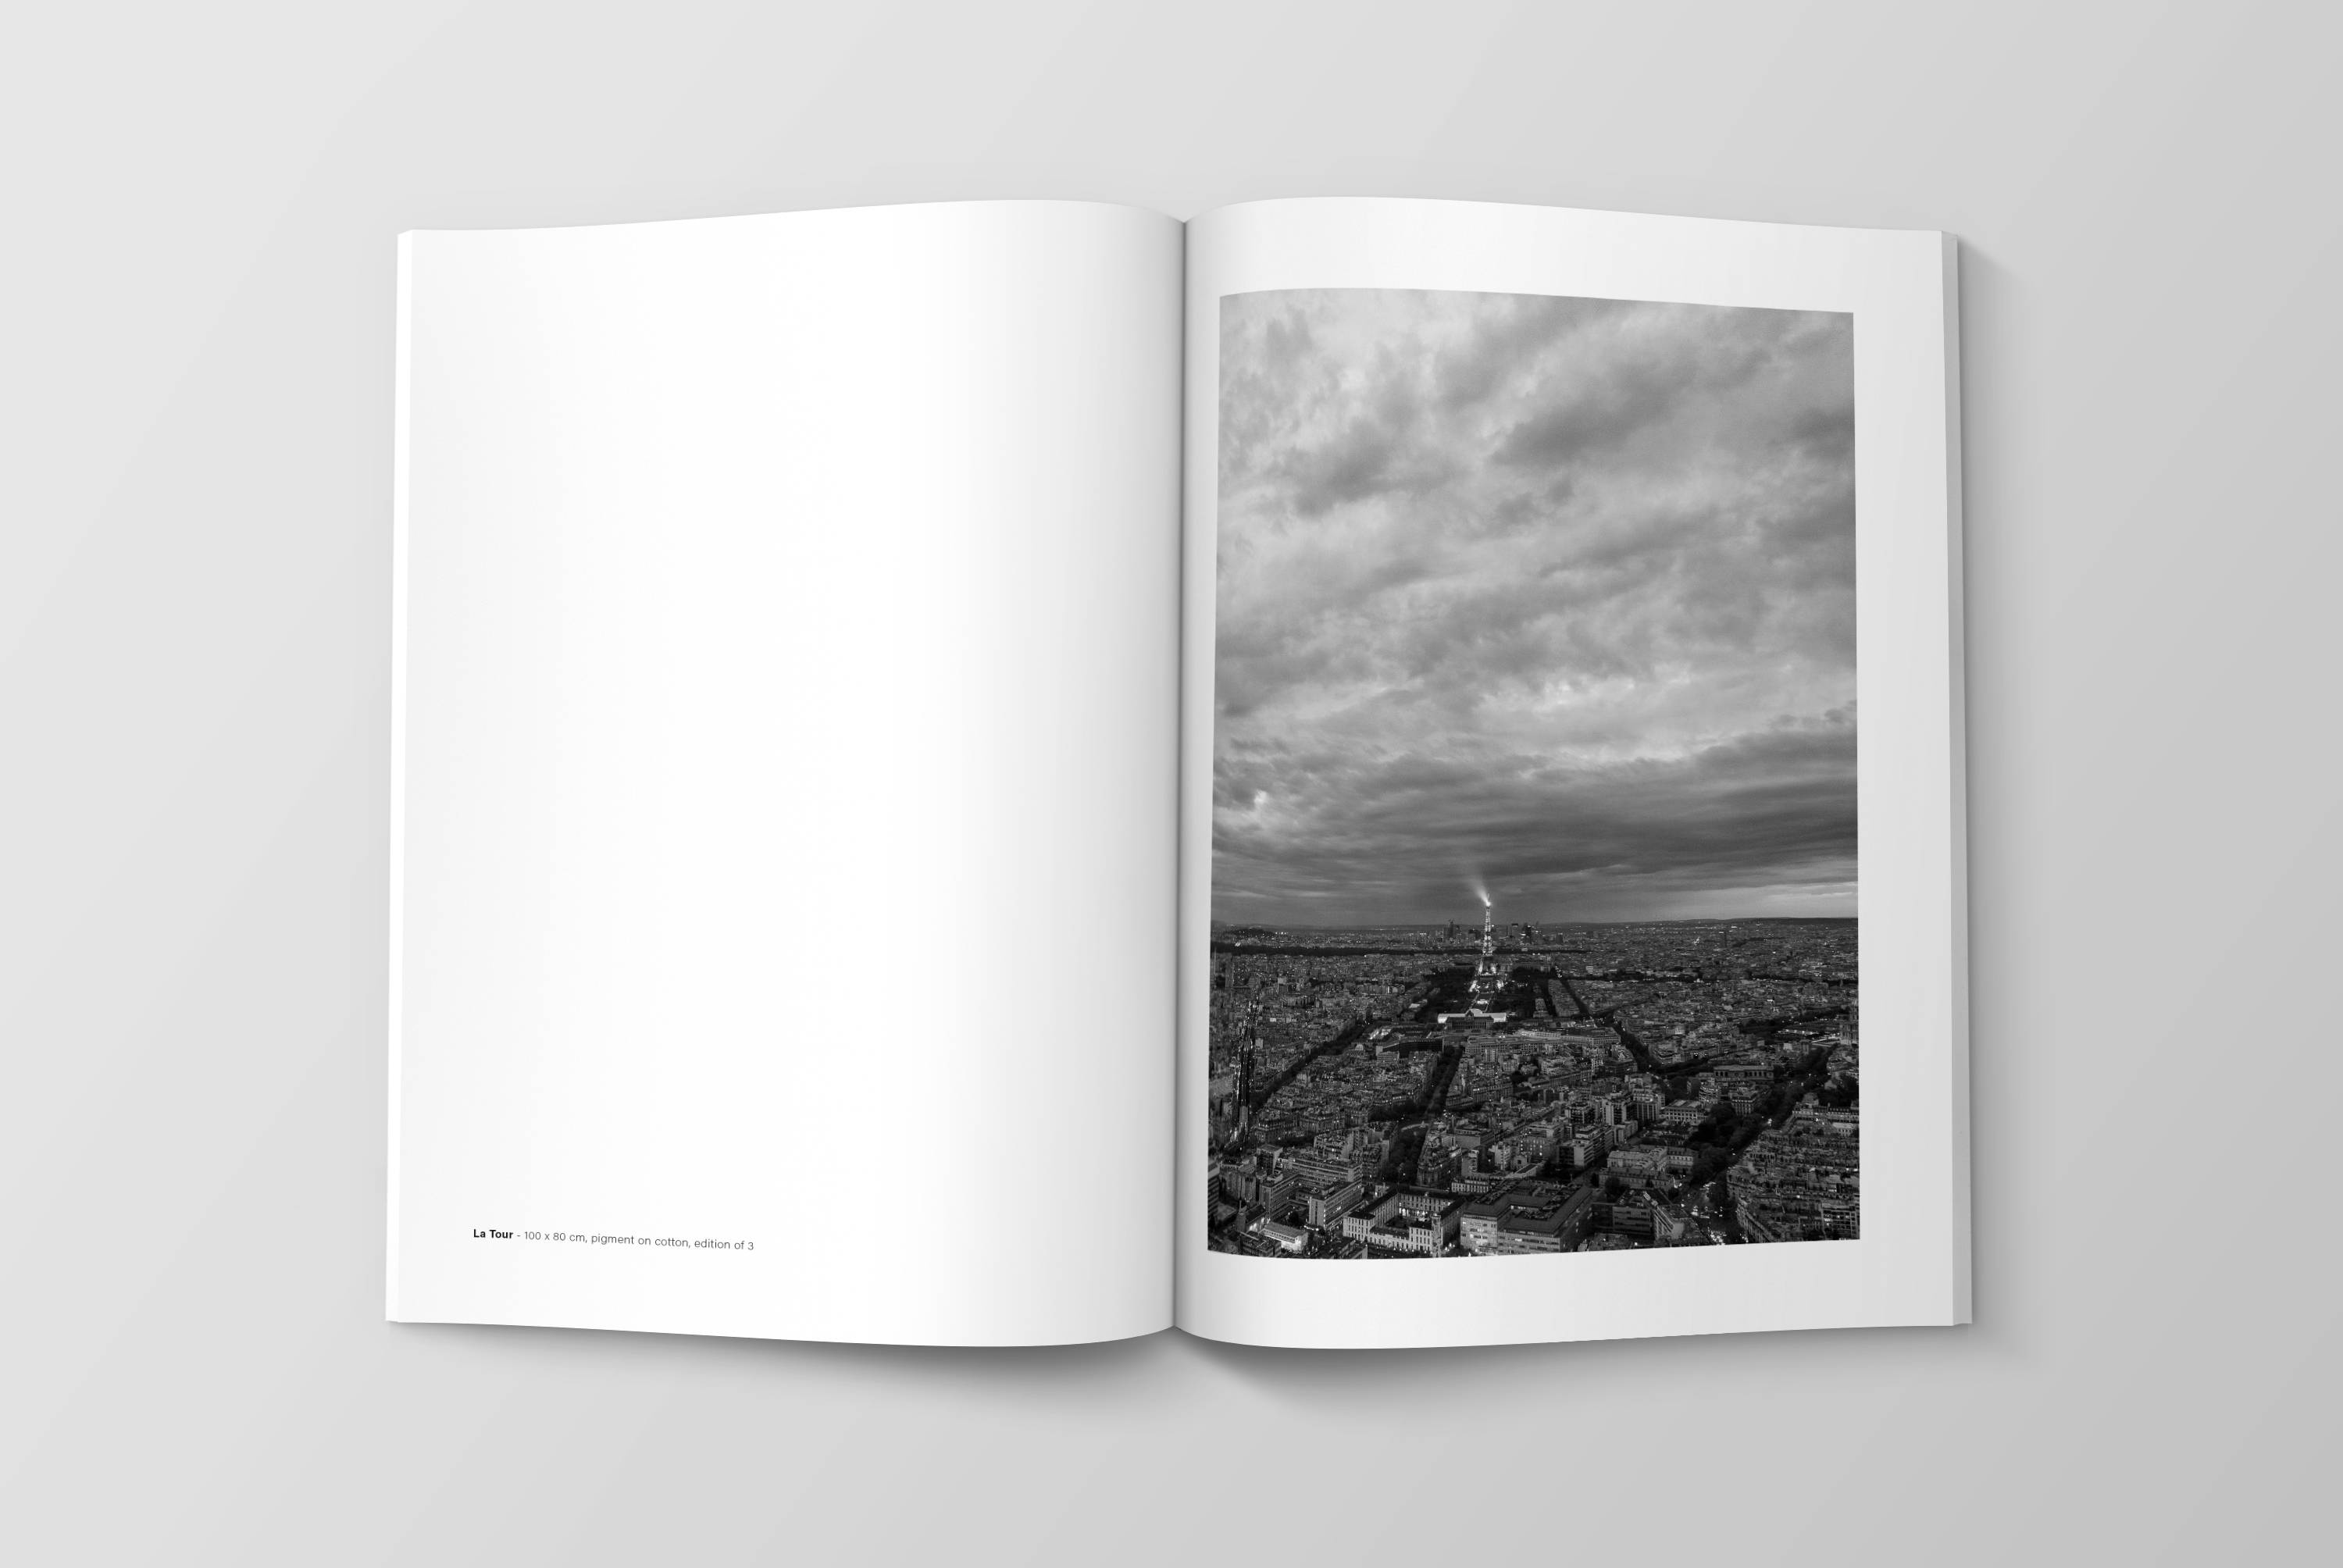 Artbook "Kontemplation" - Photographies Nabil Zitouni - Fotografien in Limited Editions - Contemporary Artworks